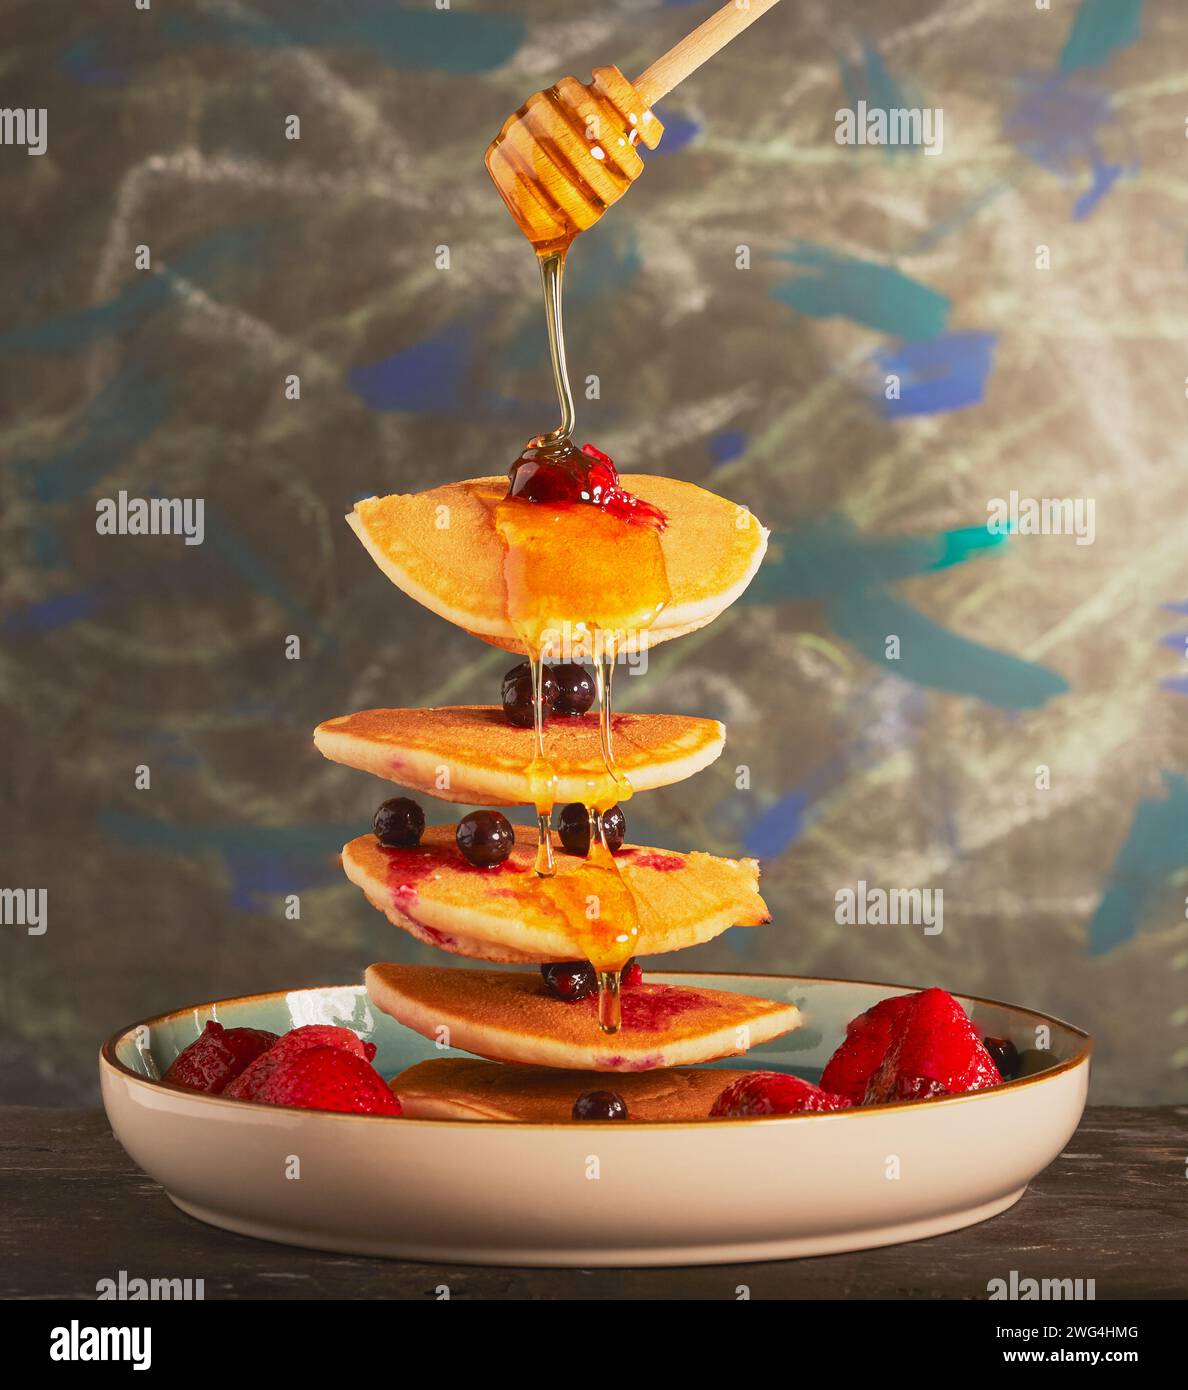 Flying pancakes with mixed berries and honey being drizzled over them. Stock Photo